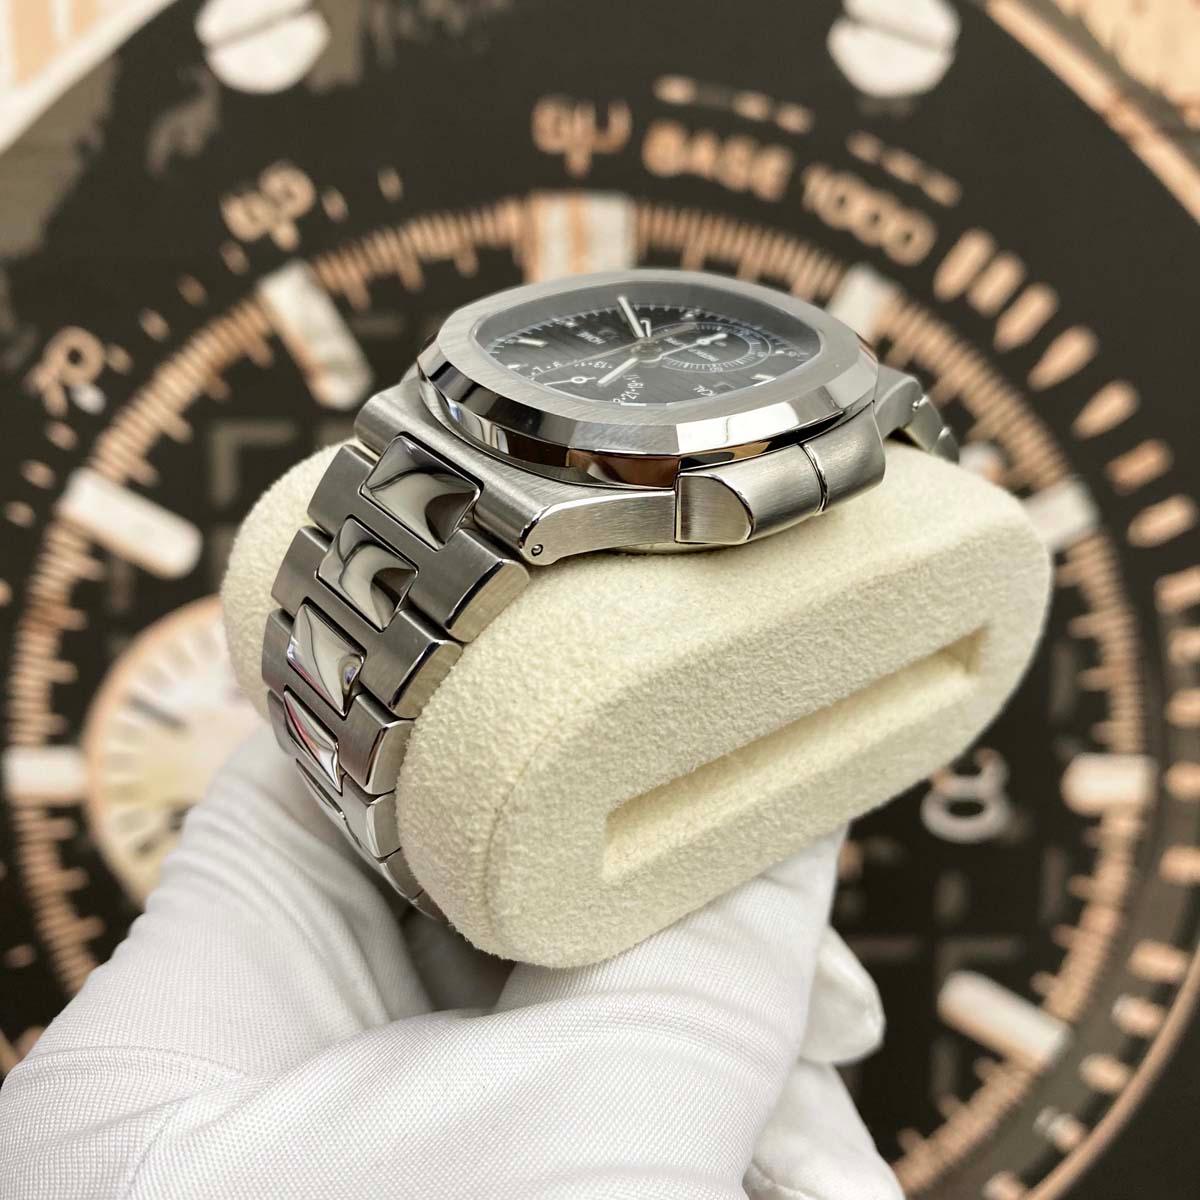 Patek Philippe Nautilus Travel Time Chronograph 40mm 5990/1A Black Dial Pre-Owned - Gotham Trading 